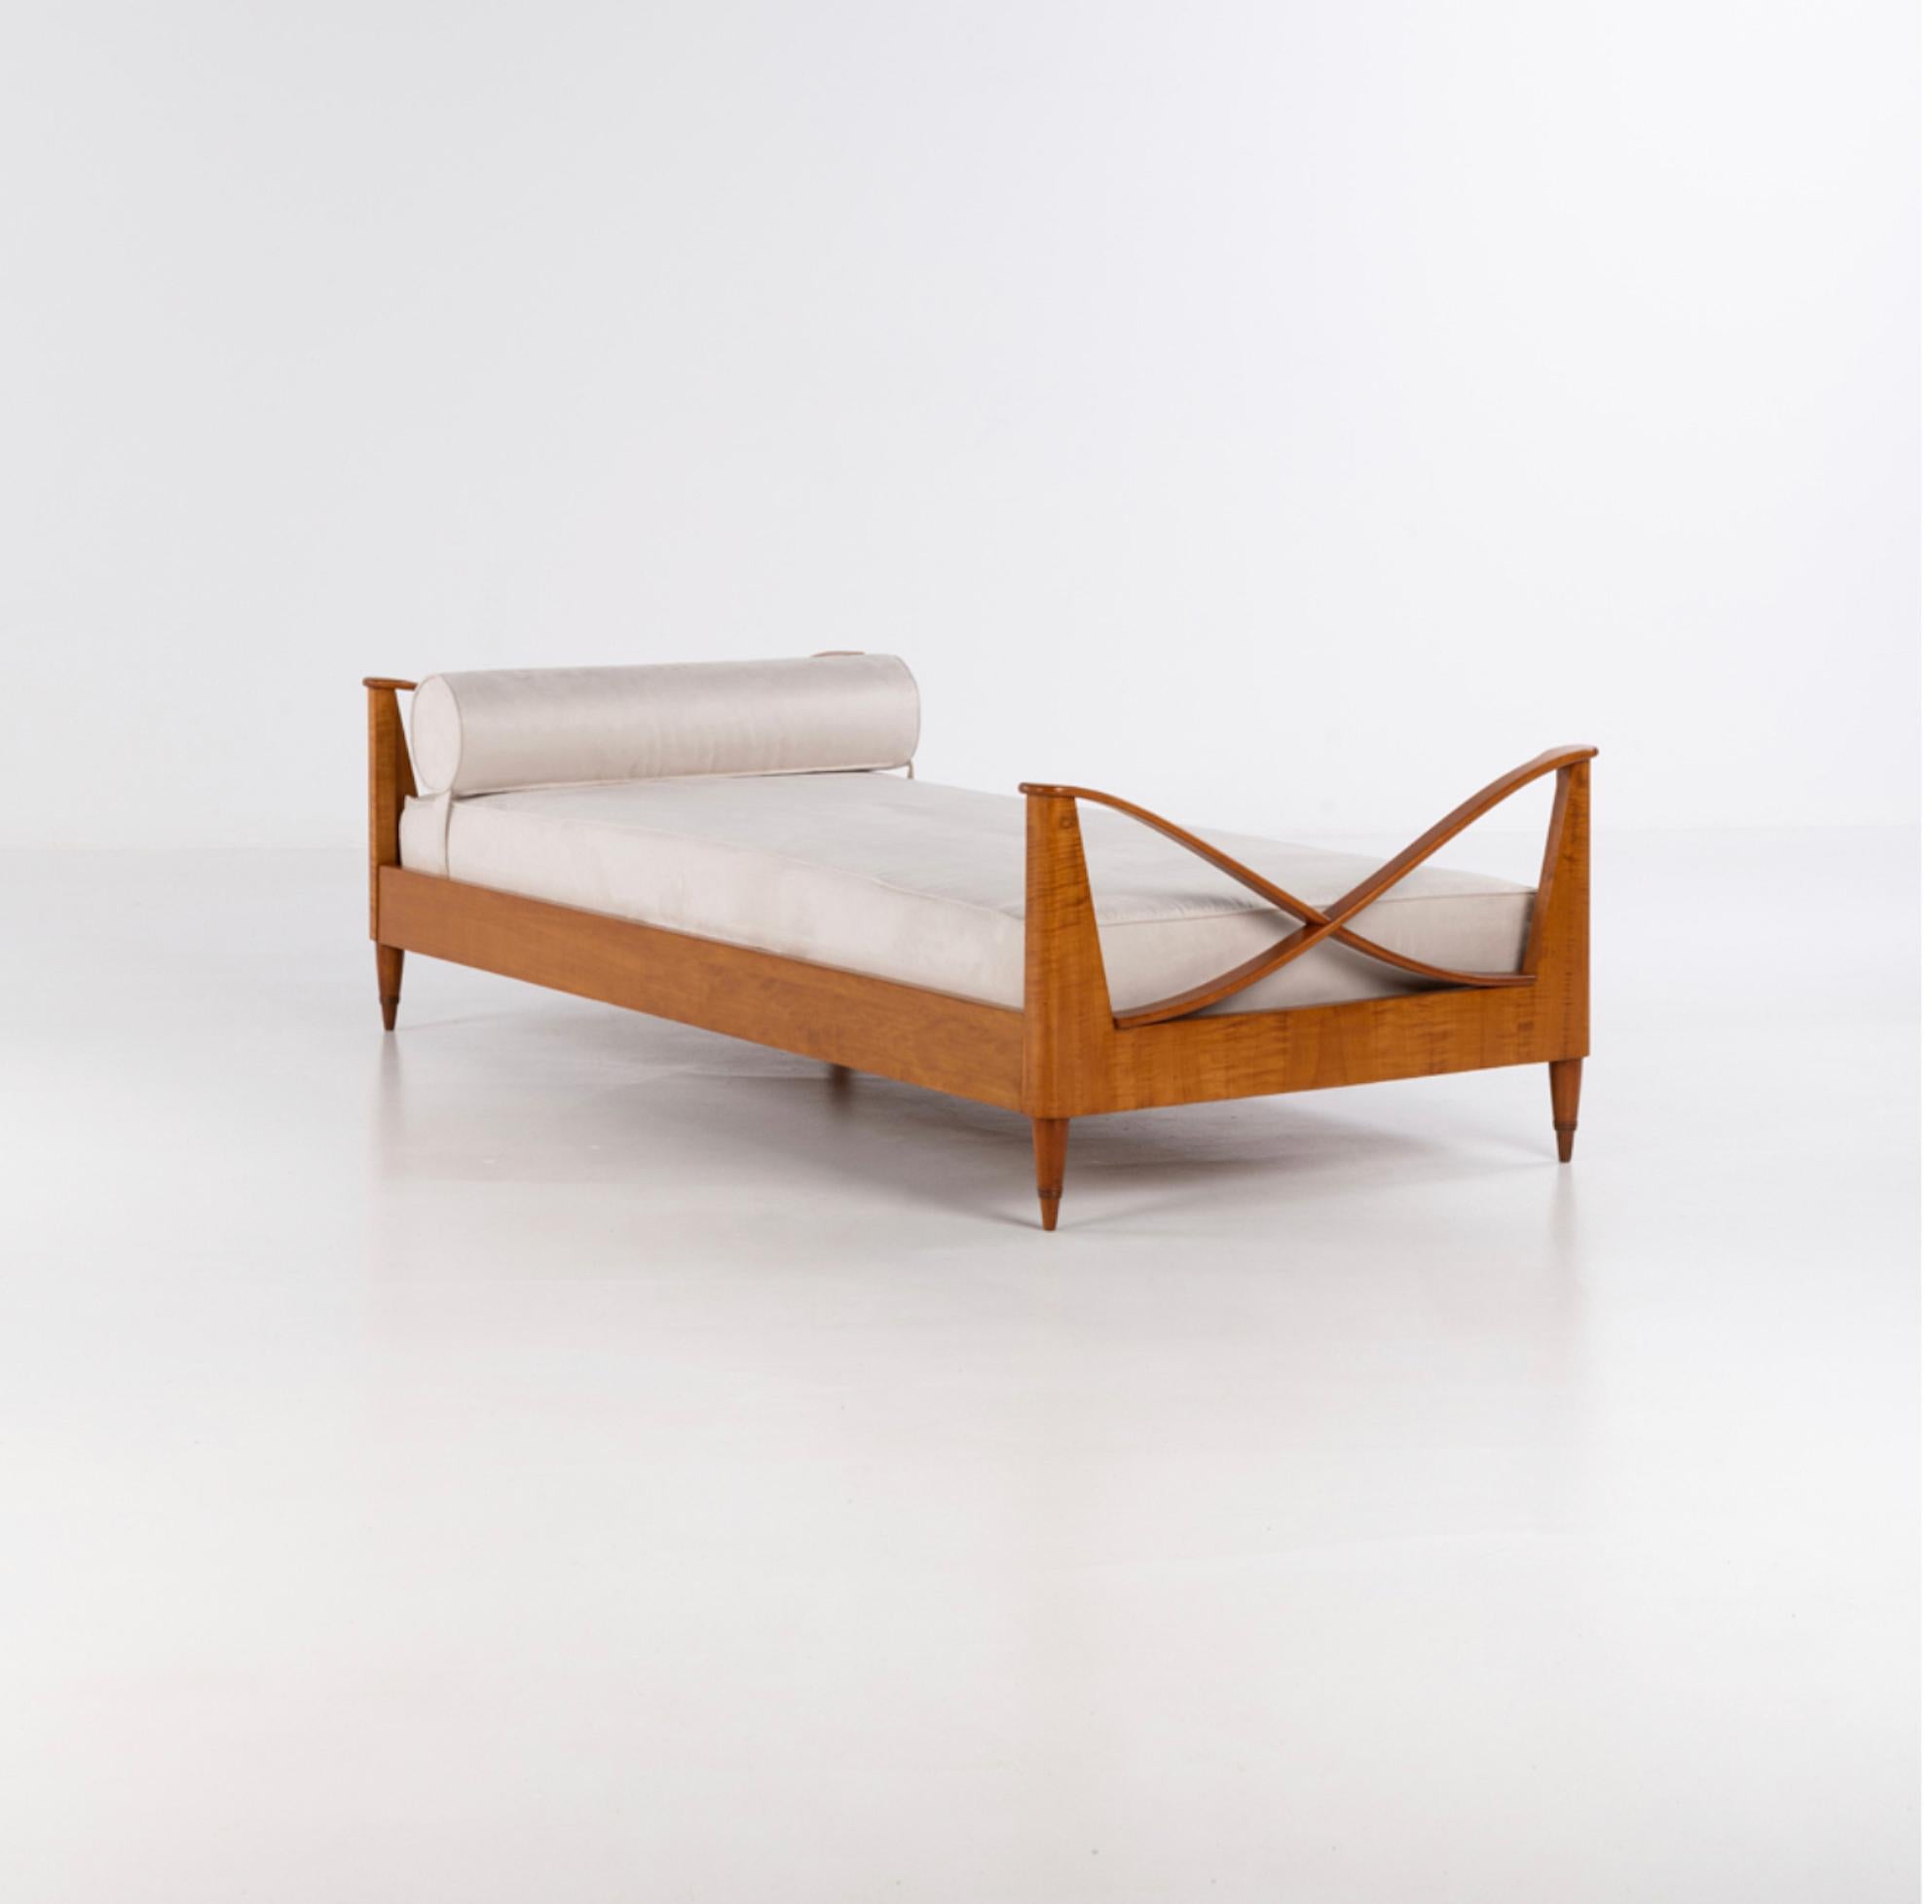 Paolo Buffa (1903-1970) 

Rare and very elegant wooden daybed
Varnished walnut and fabric 
Model created circa 1940 

H 58 × L 205 × W 95 cm

Paolo Buffa was an Italian furniture designer who defined his own unique design aesthetic to become one of